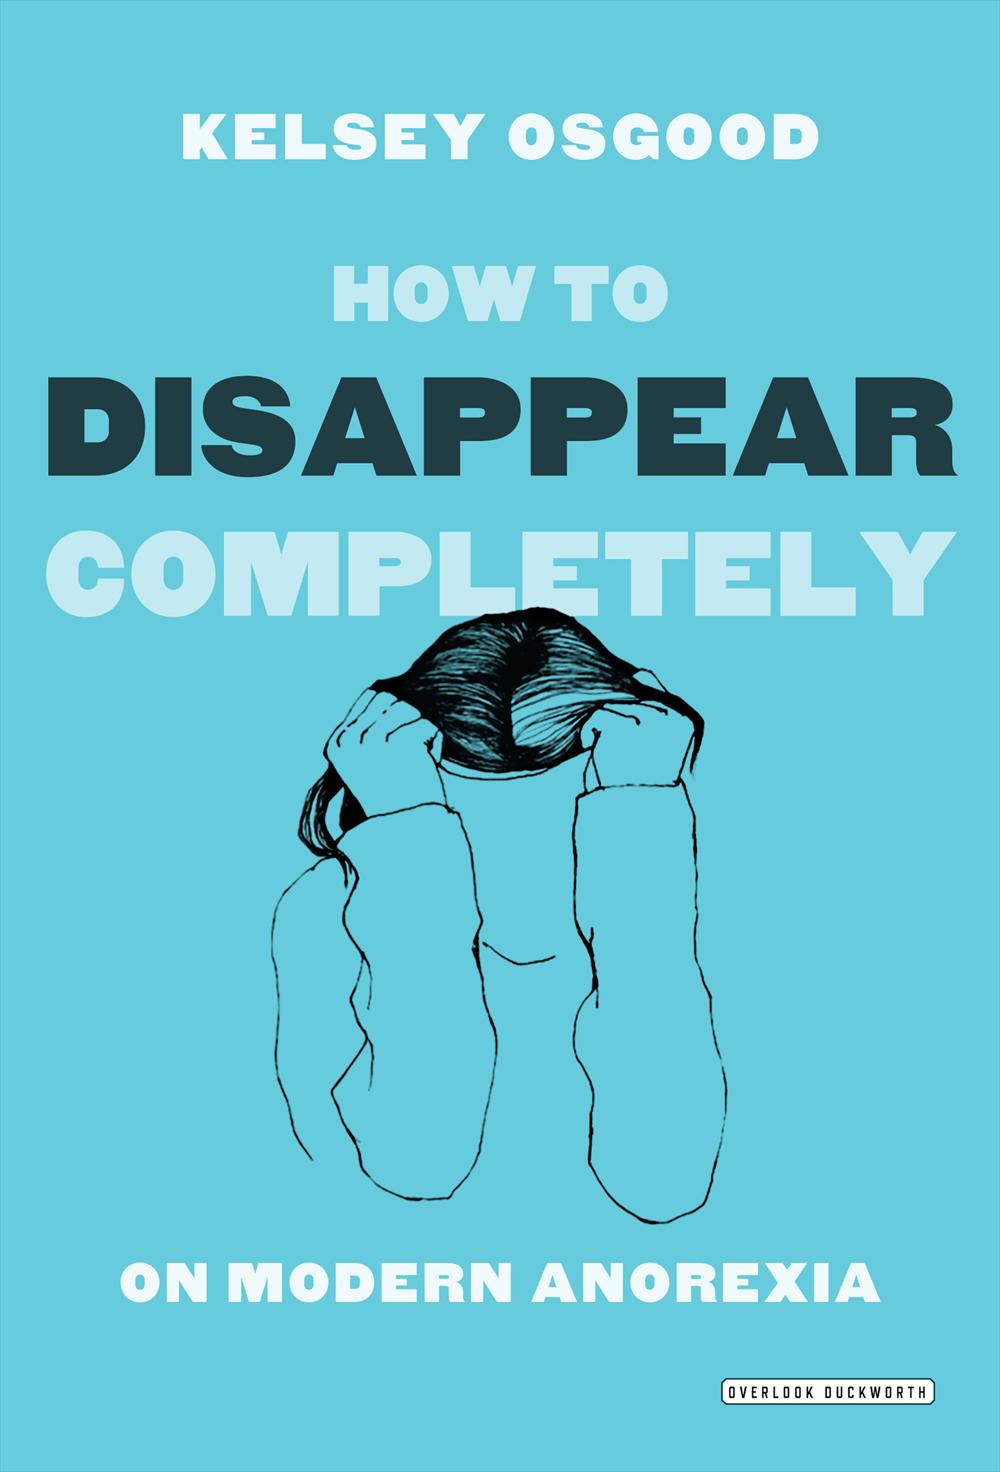 Book Launch: How to Disappear Completely by Kelsey Osgood, with Kate Taylor and Daphne Merkin